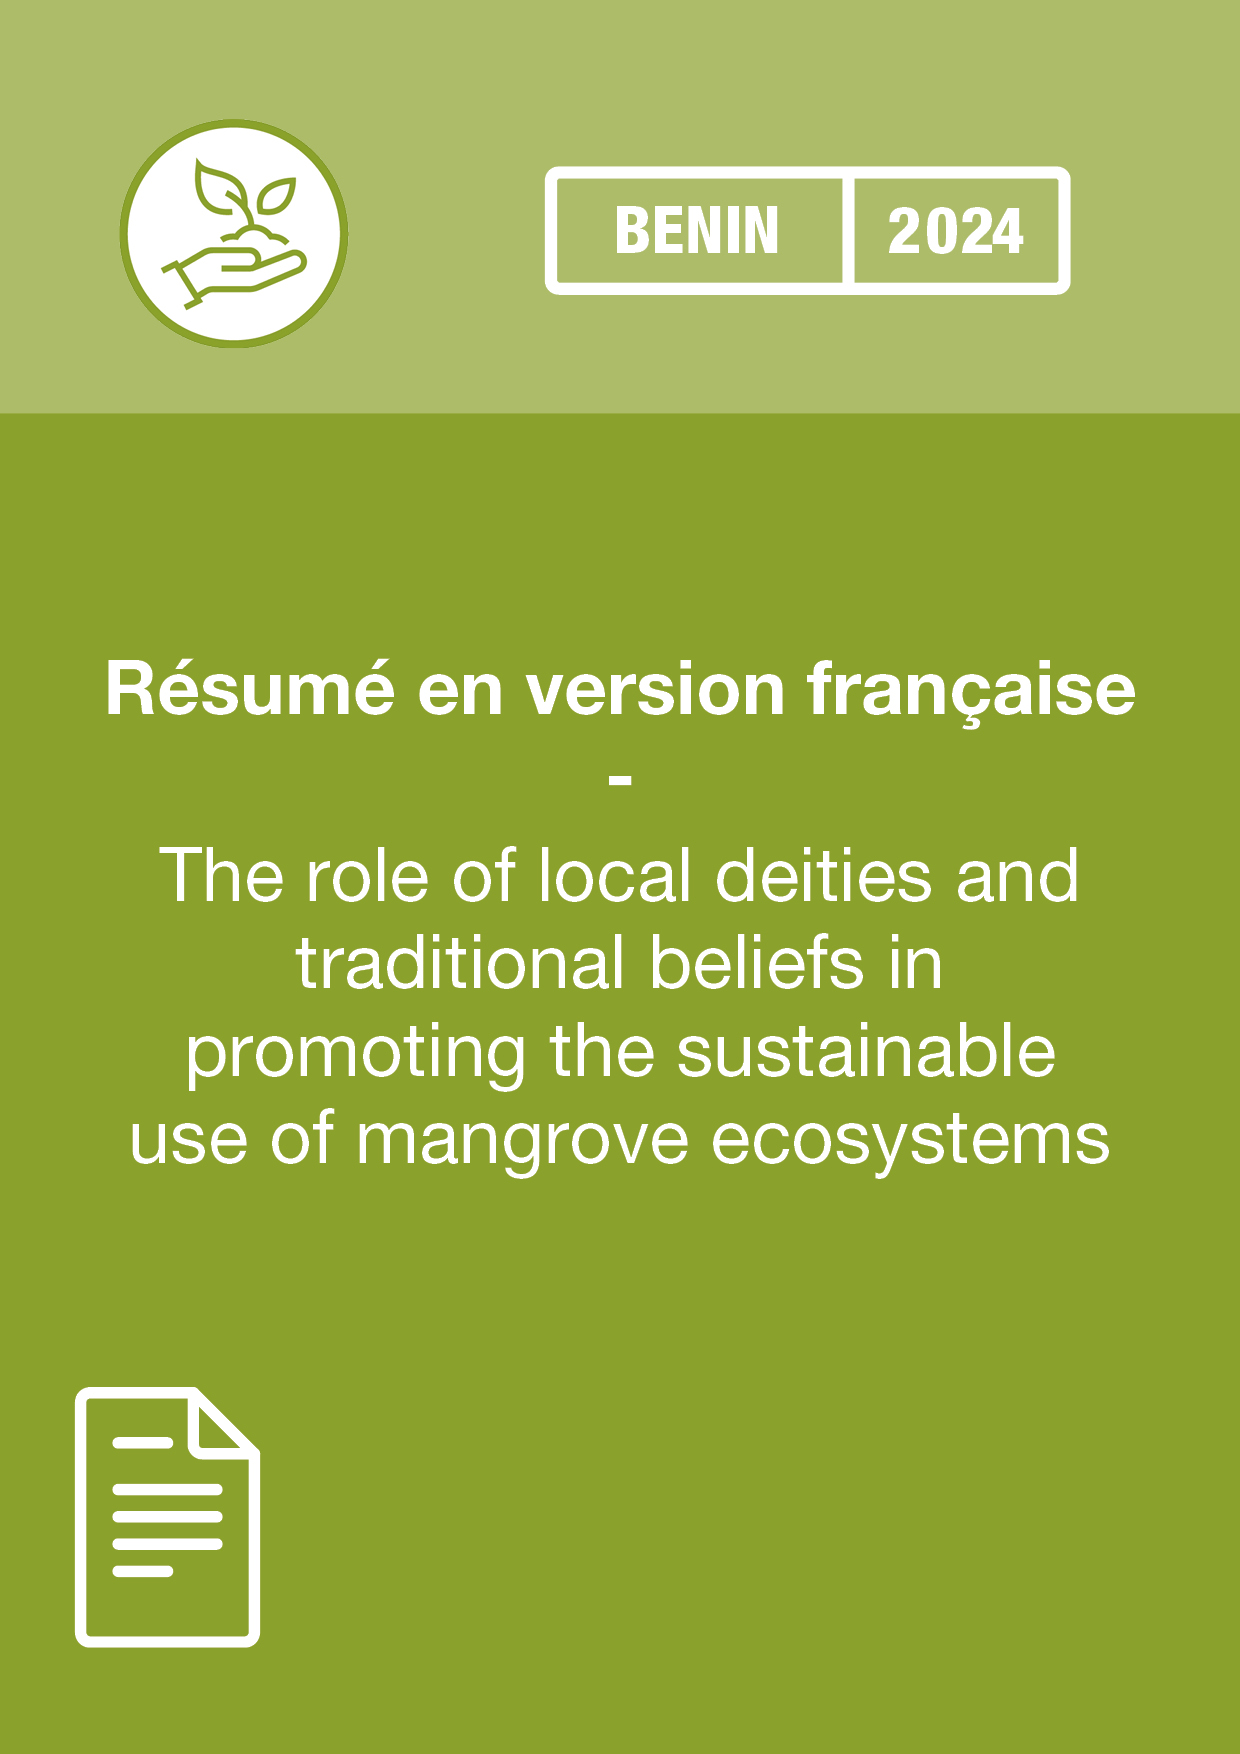 Résumé : The role of local deities and traditional beliefs in promoting the sustainable use of mangrove ecosystems